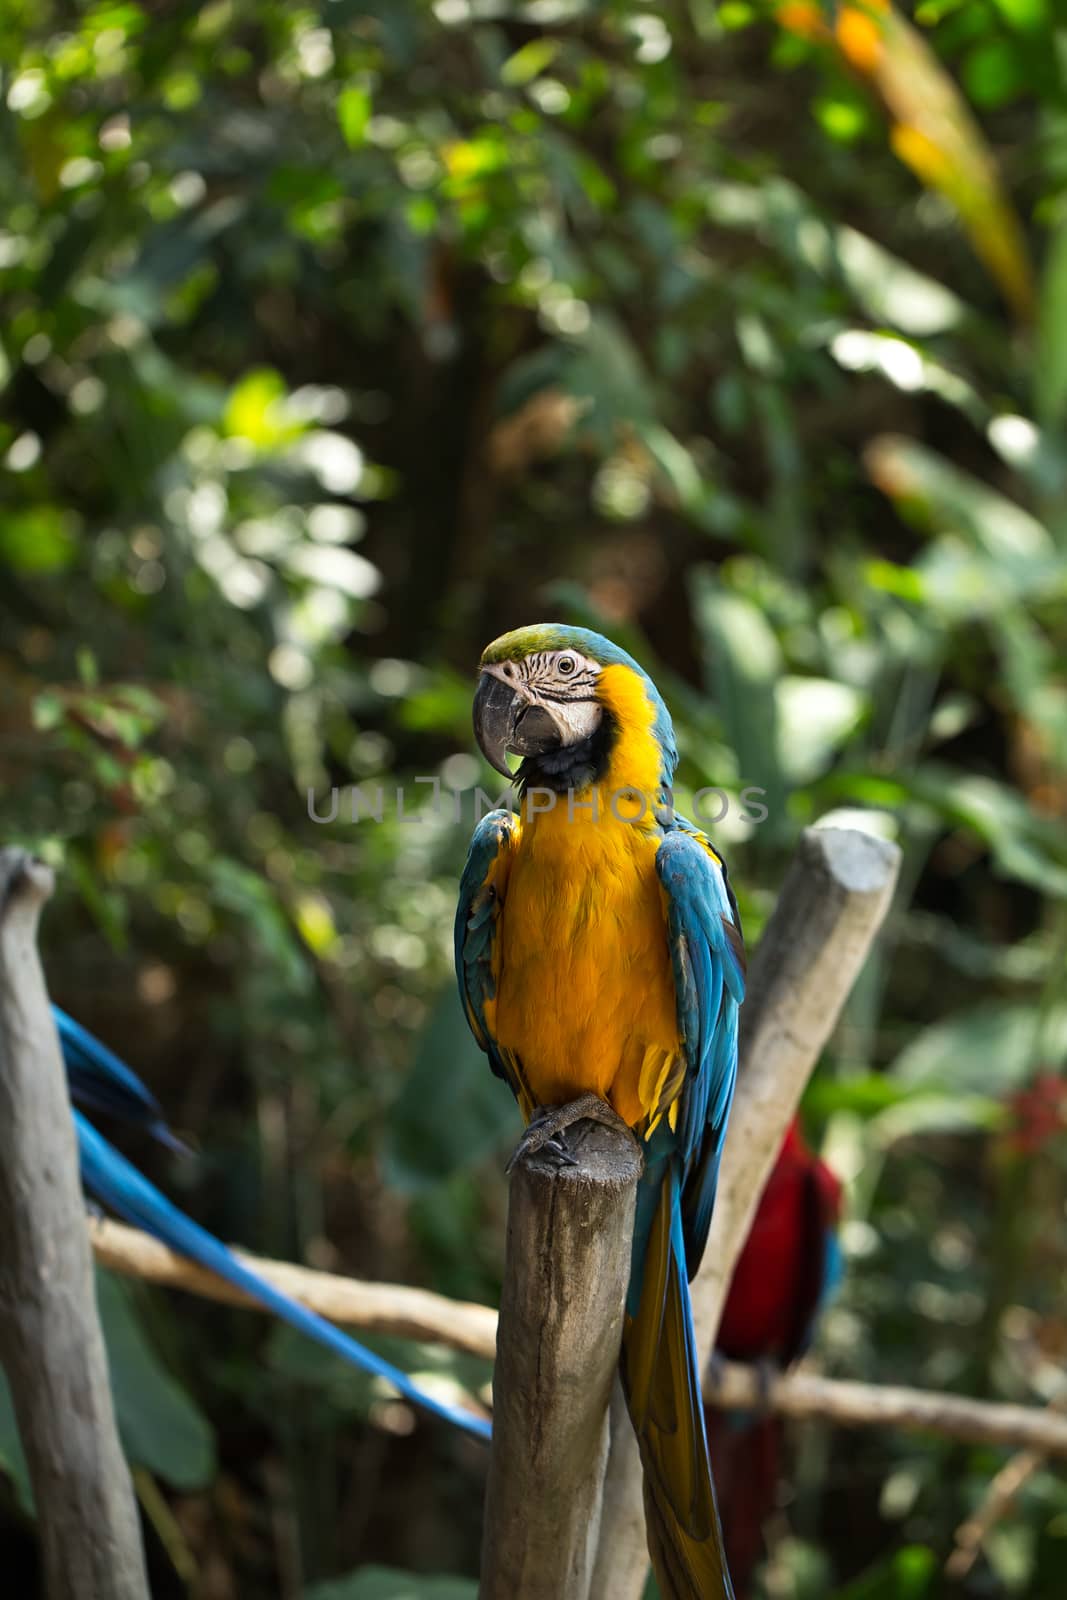 Parrot in Bali Island Indonesia - nature background by boys1983@mail.ru